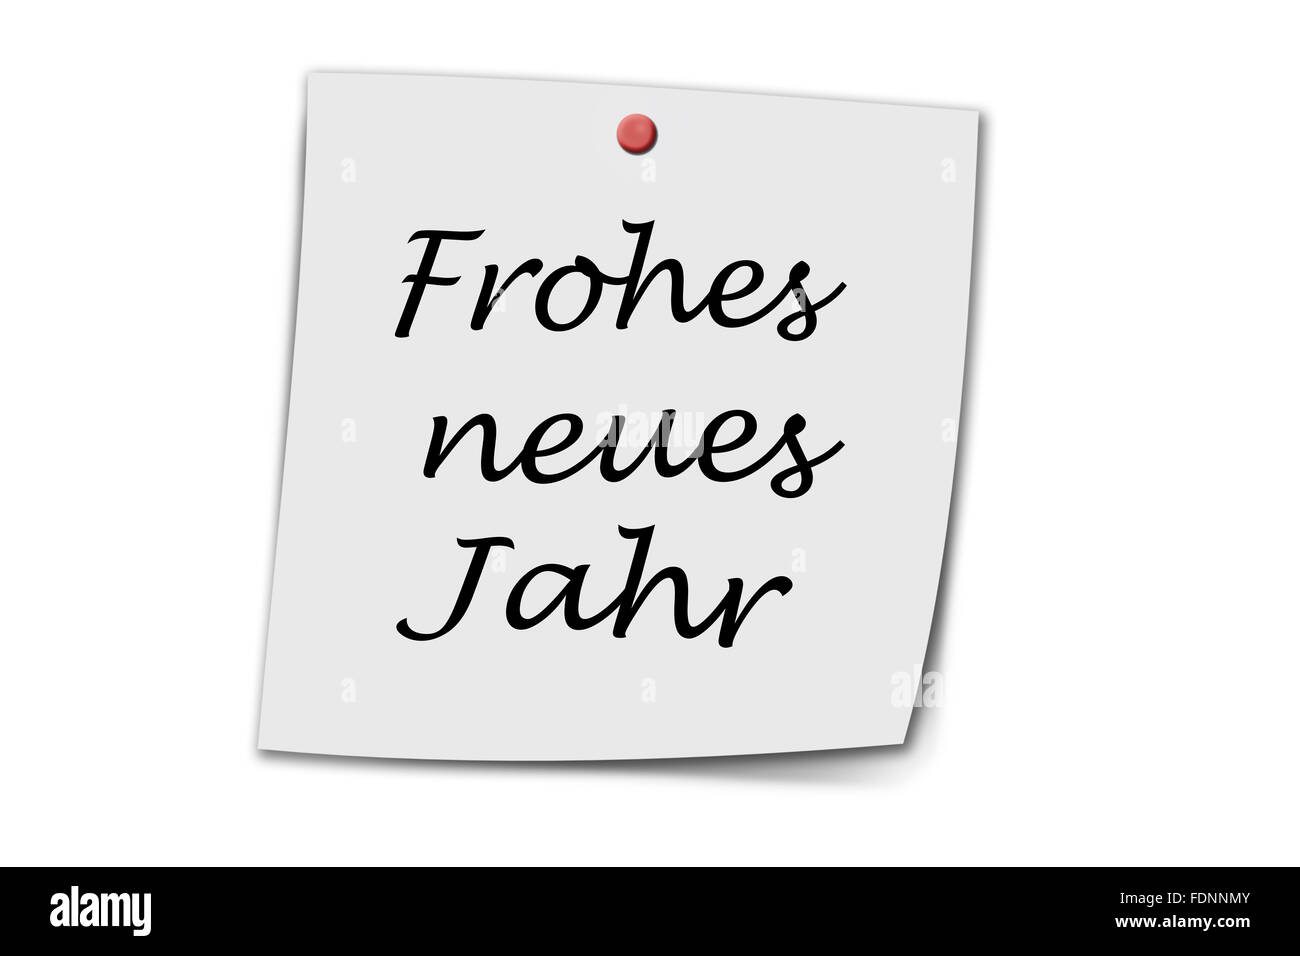 Frohes neues Jahr (German happy new year) written on a memo isolated on white Stock Photo